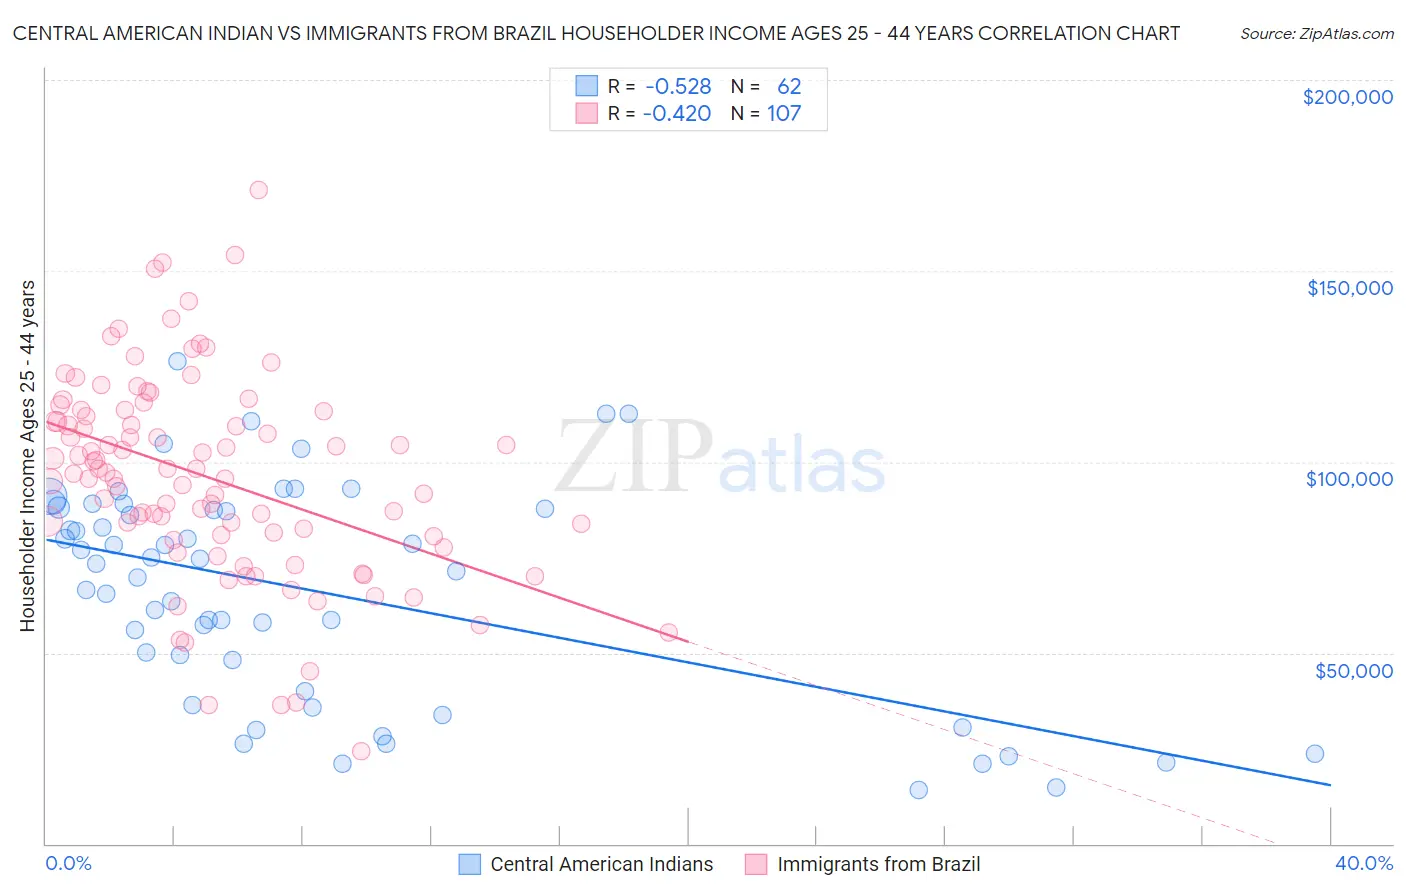 Central American Indian vs Immigrants from Brazil Householder Income Ages 25 - 44 years